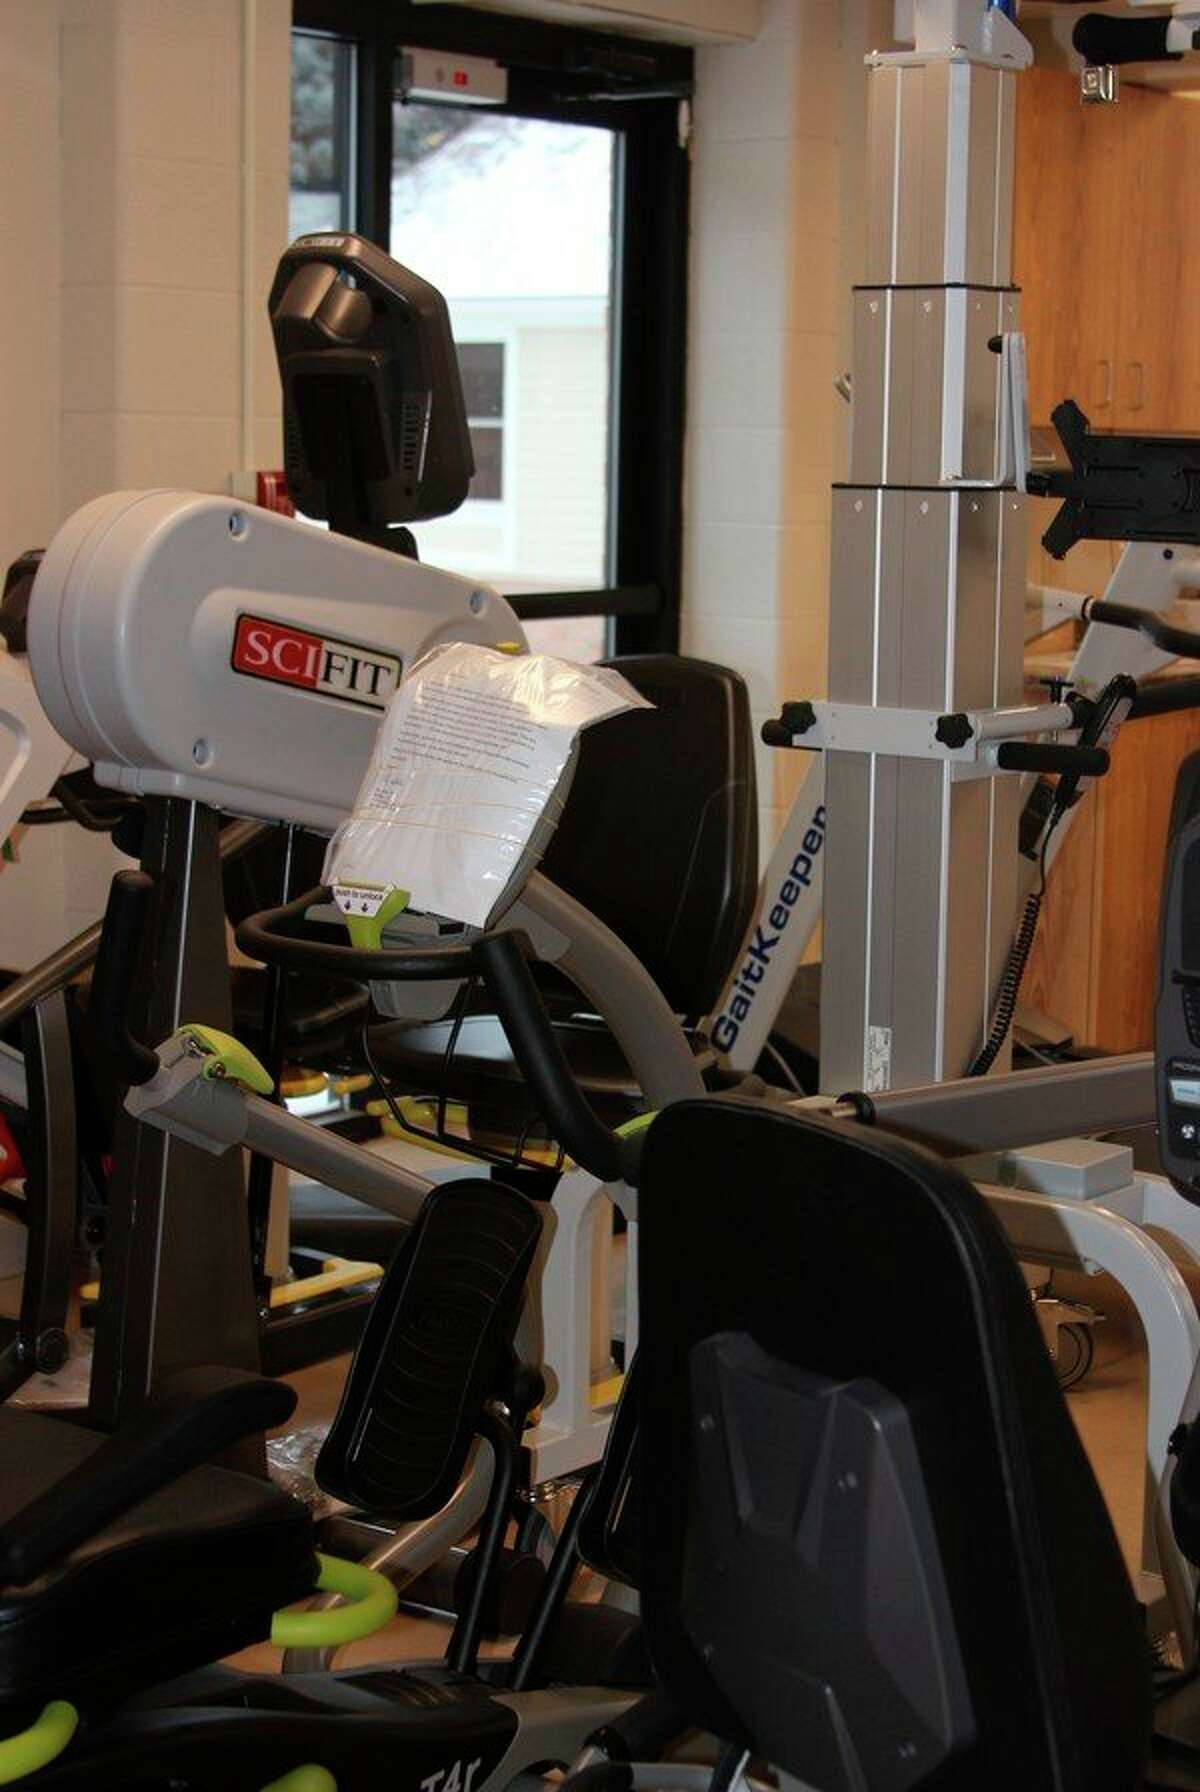 The Maples Medical Care Facility is turning the old cafeteria into a therapy gym, as part of the renovation process for what remains of the old building. (Photo/Colin Merry)